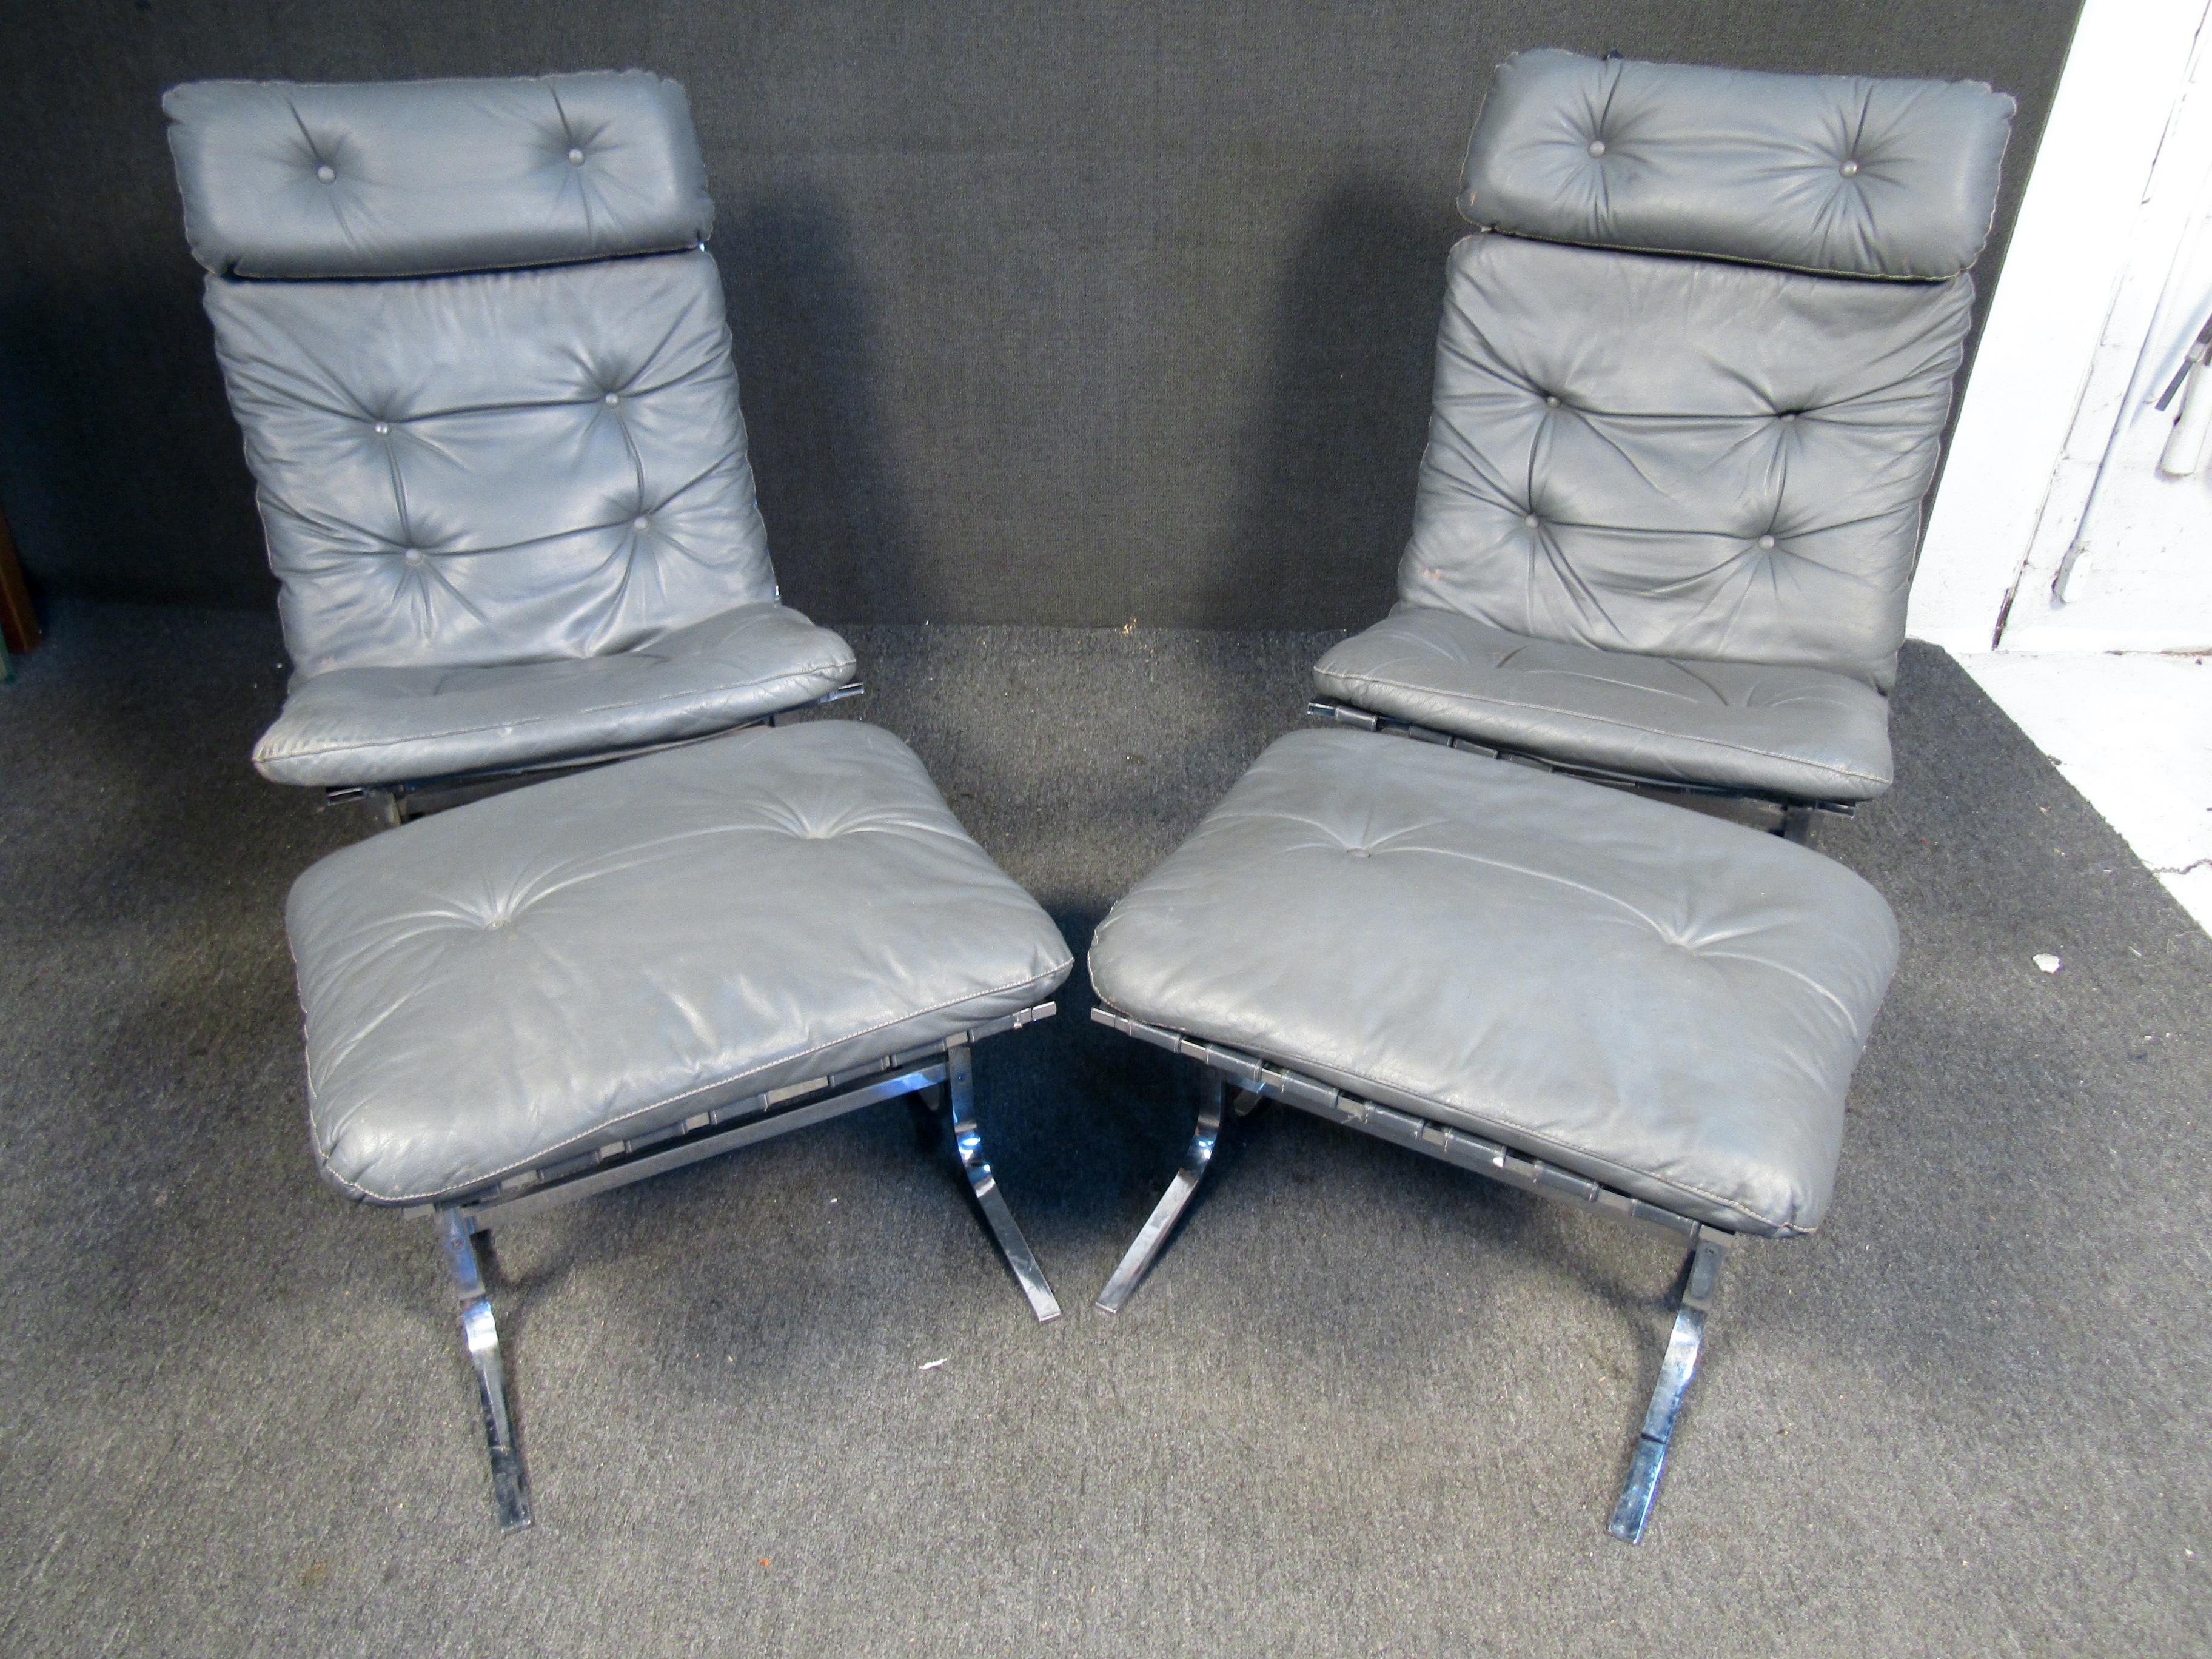 This pair of Italian chrome and leather lounge chairs are tufted and come with two matching ottomans. The ottomans are w25